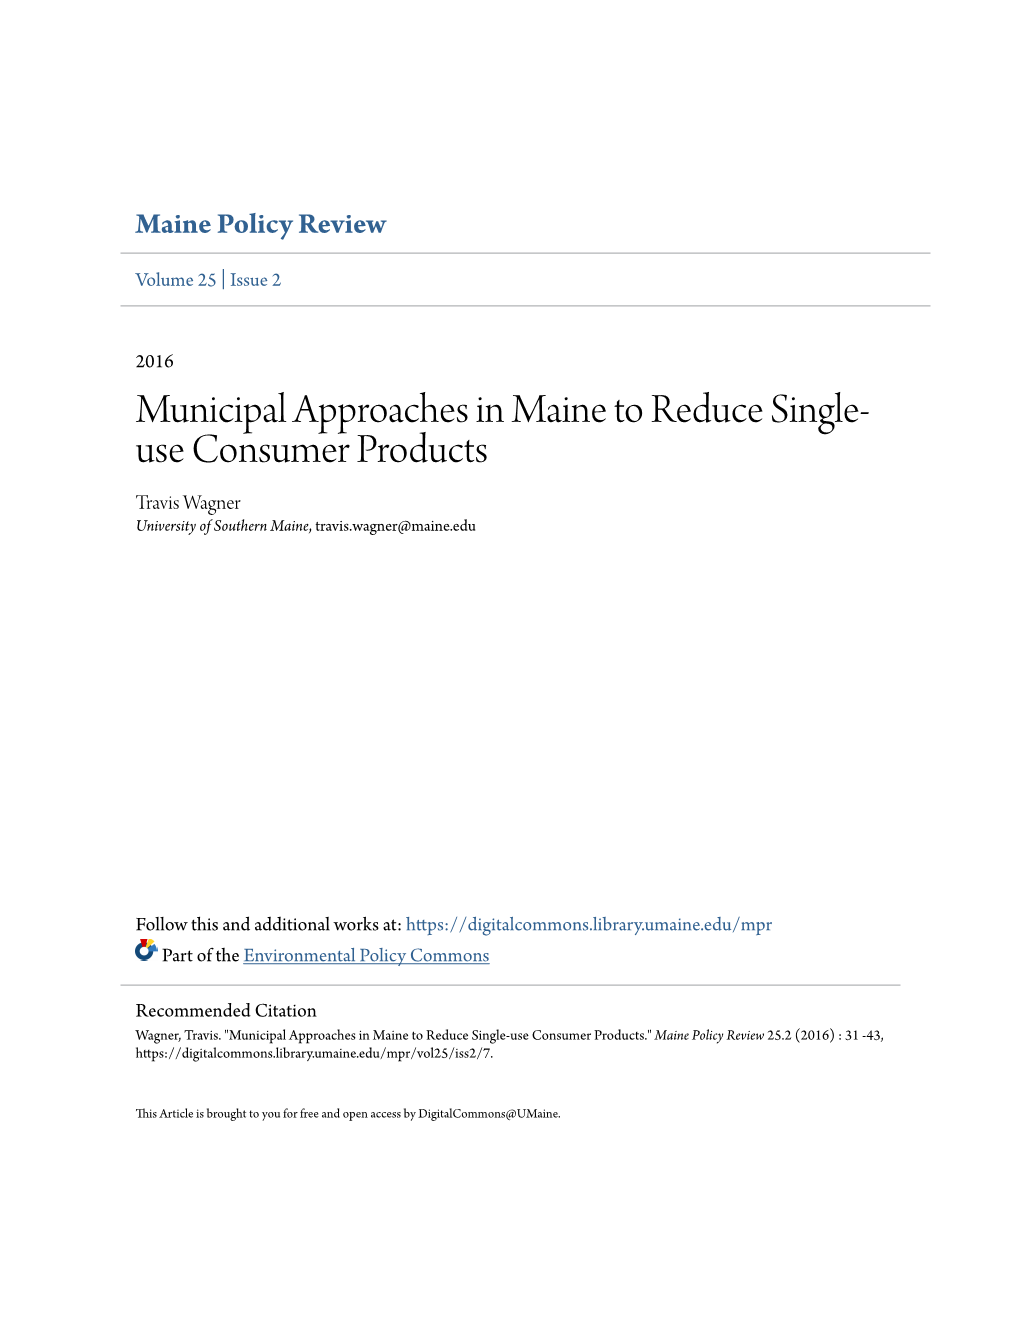 Municipal Approaches in Maine to Reduce Single-Use Consumer Products